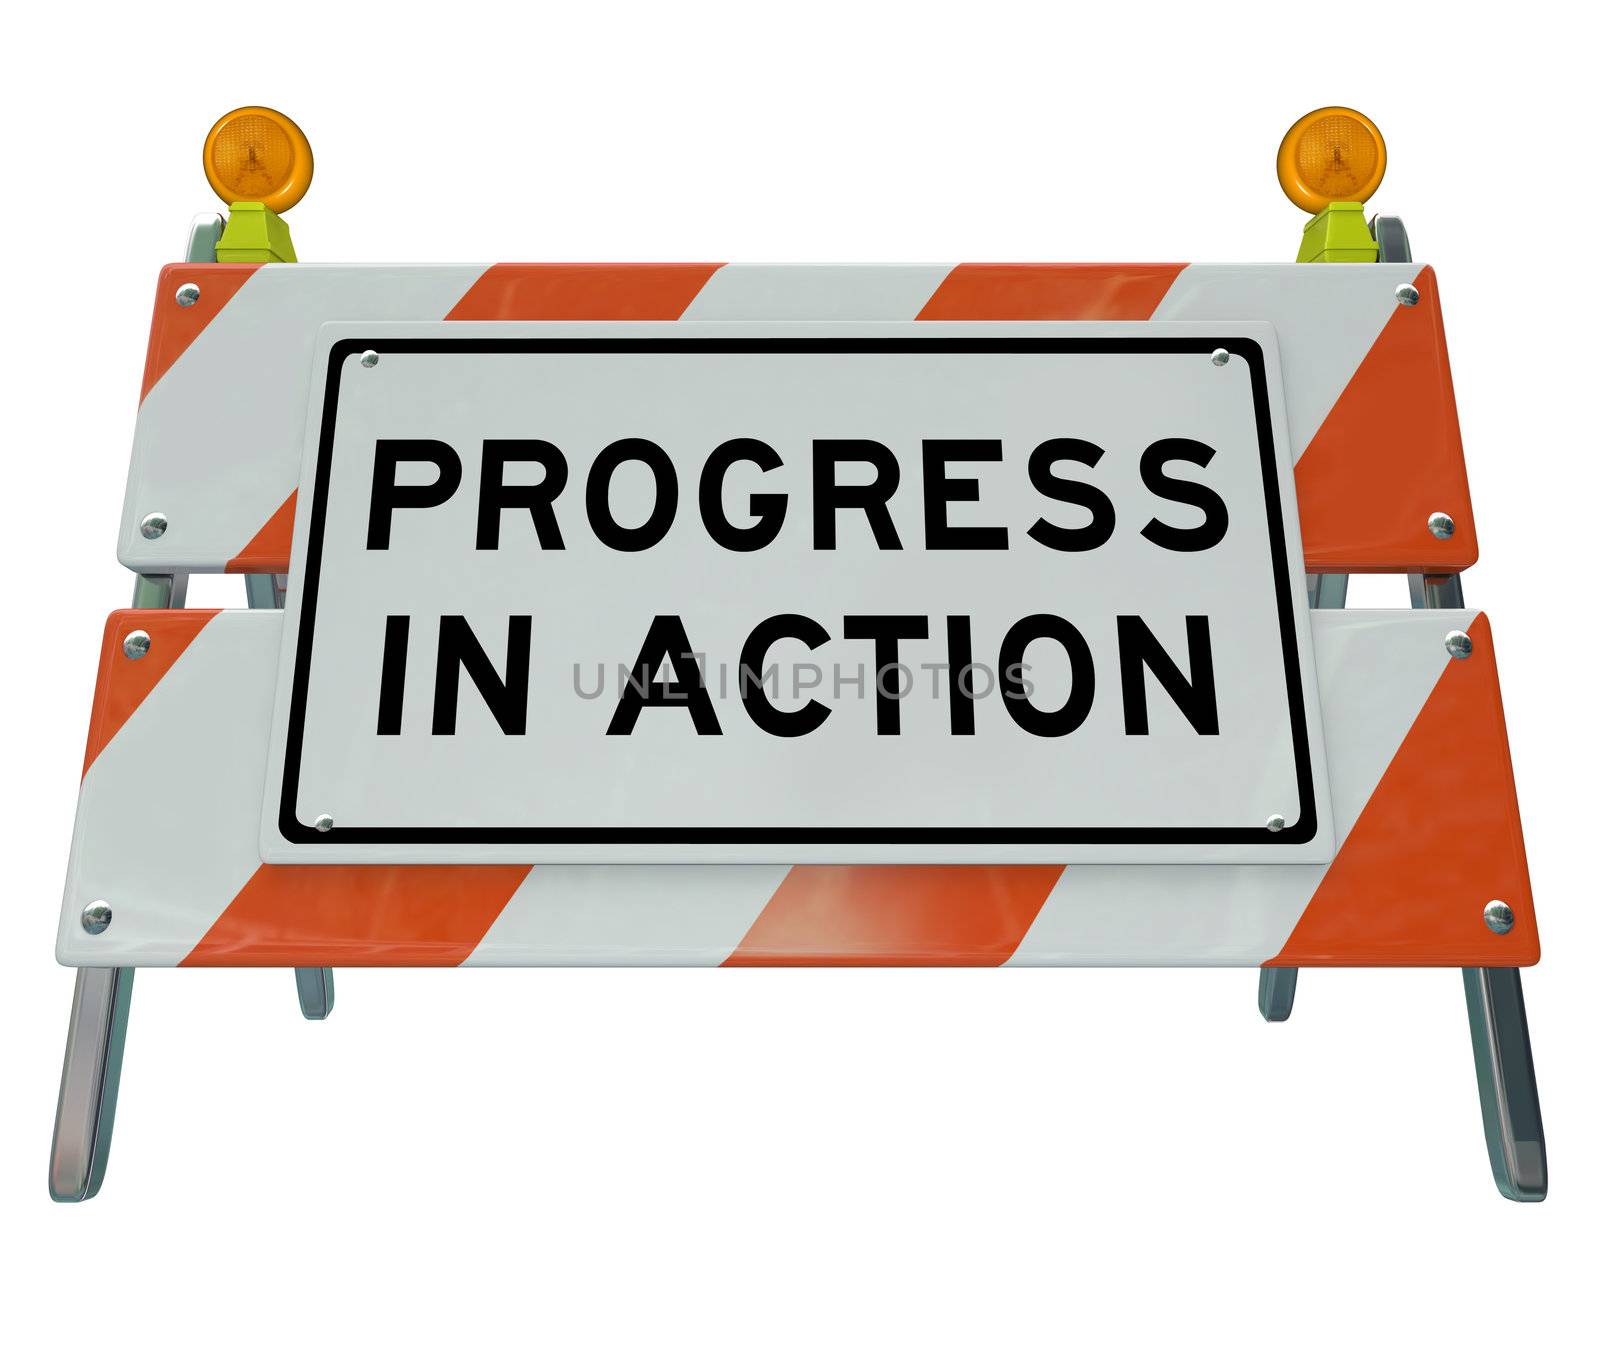 Progress in Action - Road Barricade Improvement and Change for F by iQoncept